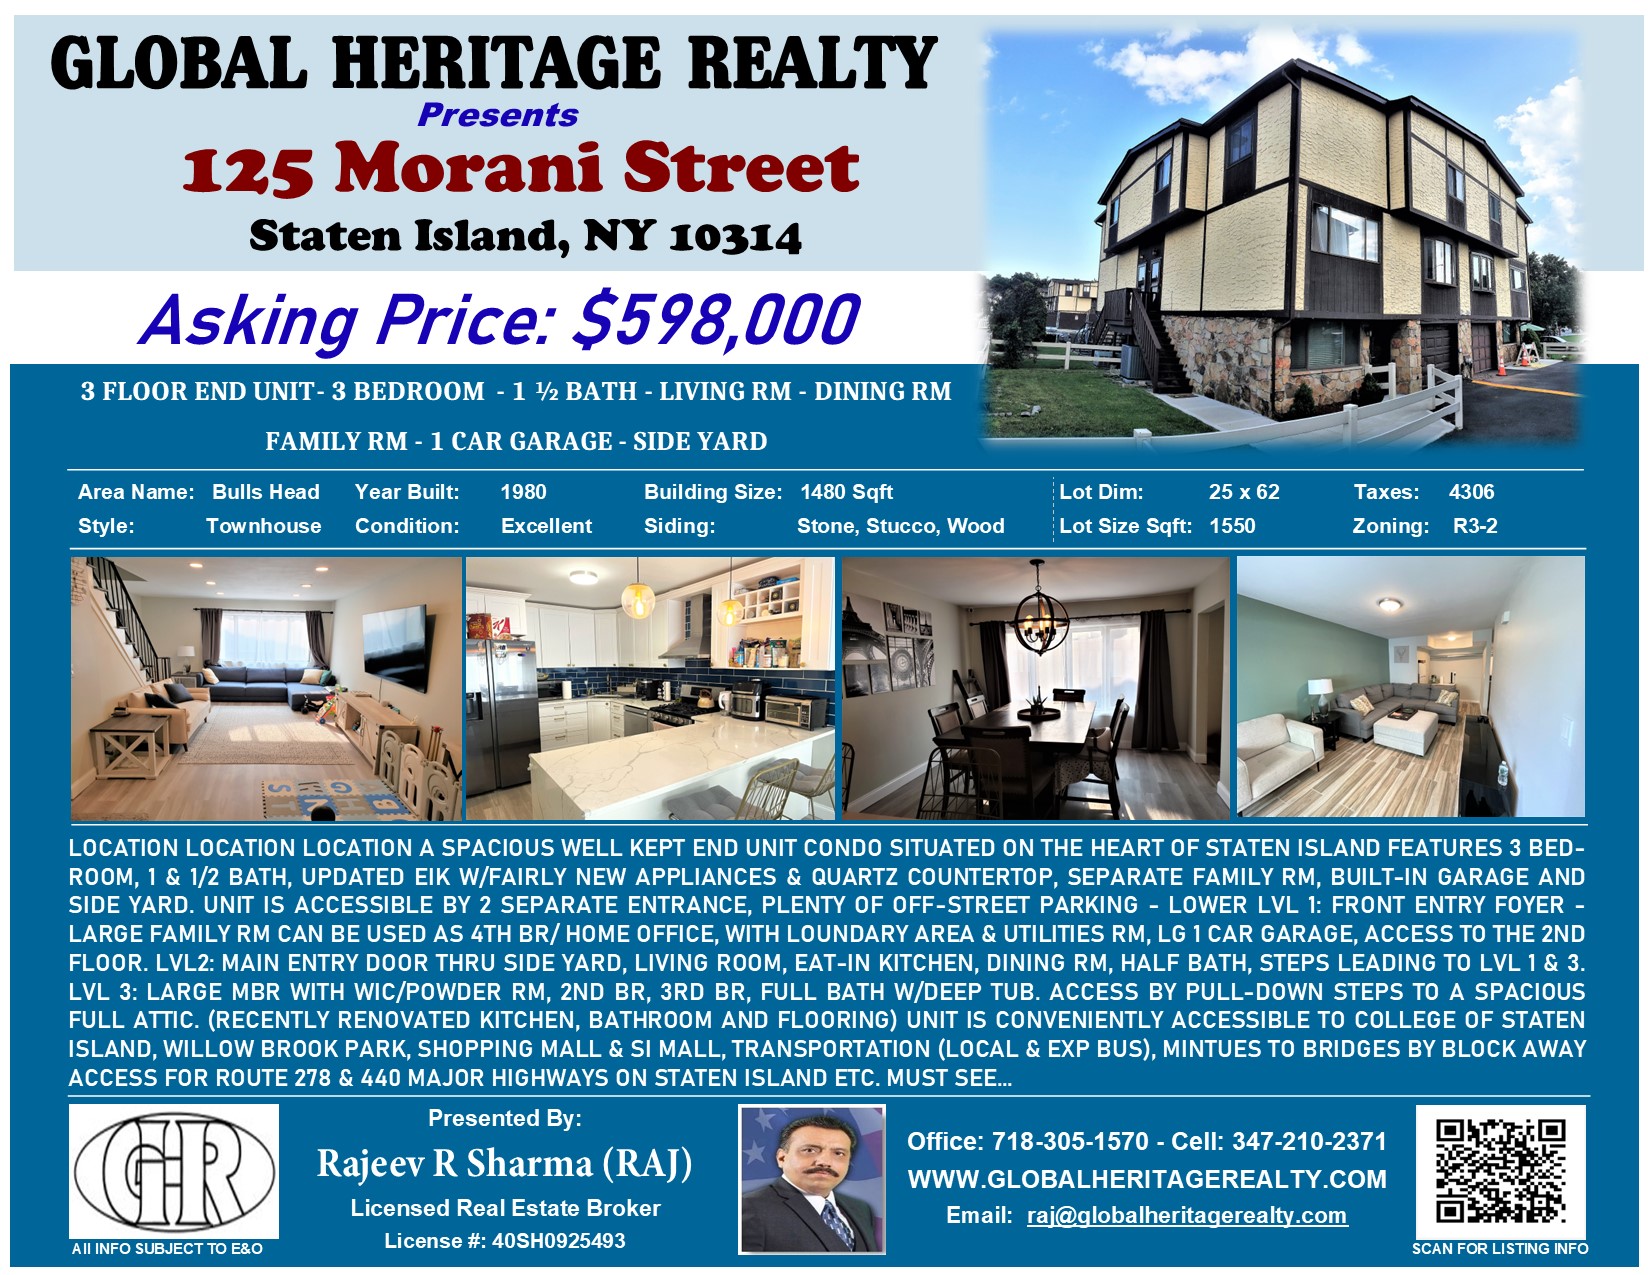 Condo for sale on Staten Island NY